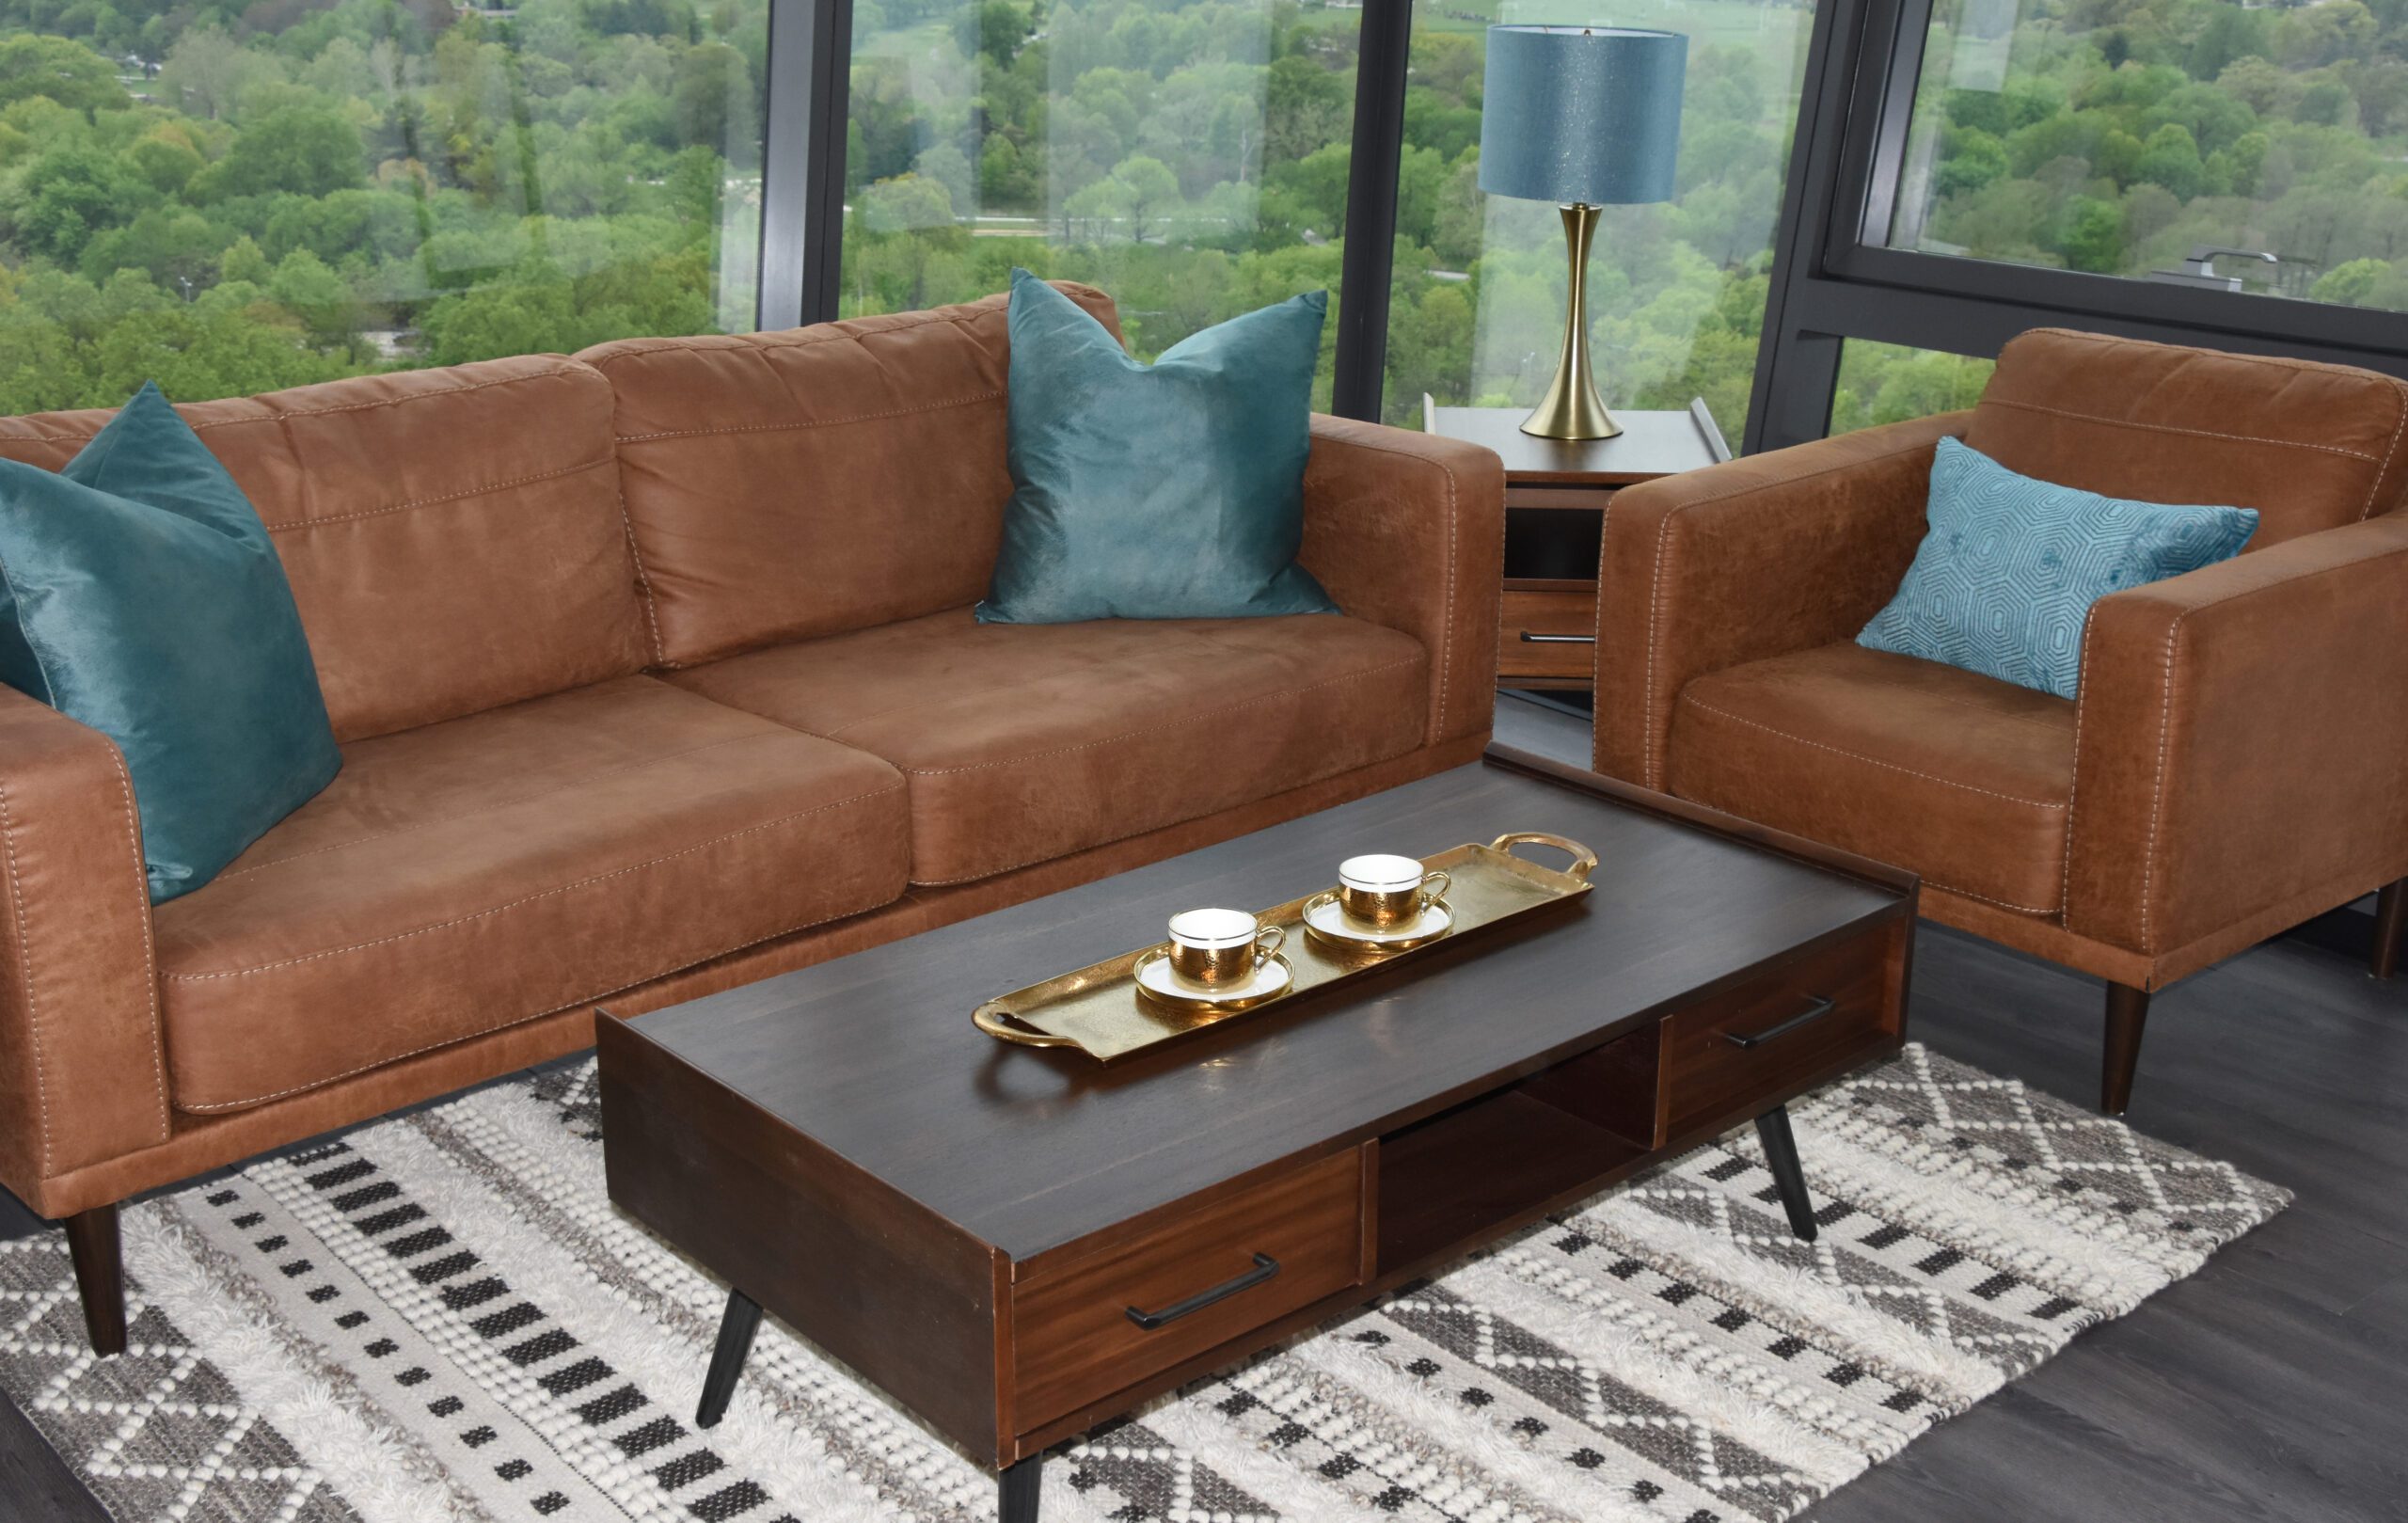 a brown leather couch and chair sit caddy corner to one another with a stylish wood coffee table between them. the couches both have bright turquoise pillows in the corners. the setting is a high-rise apartment building.